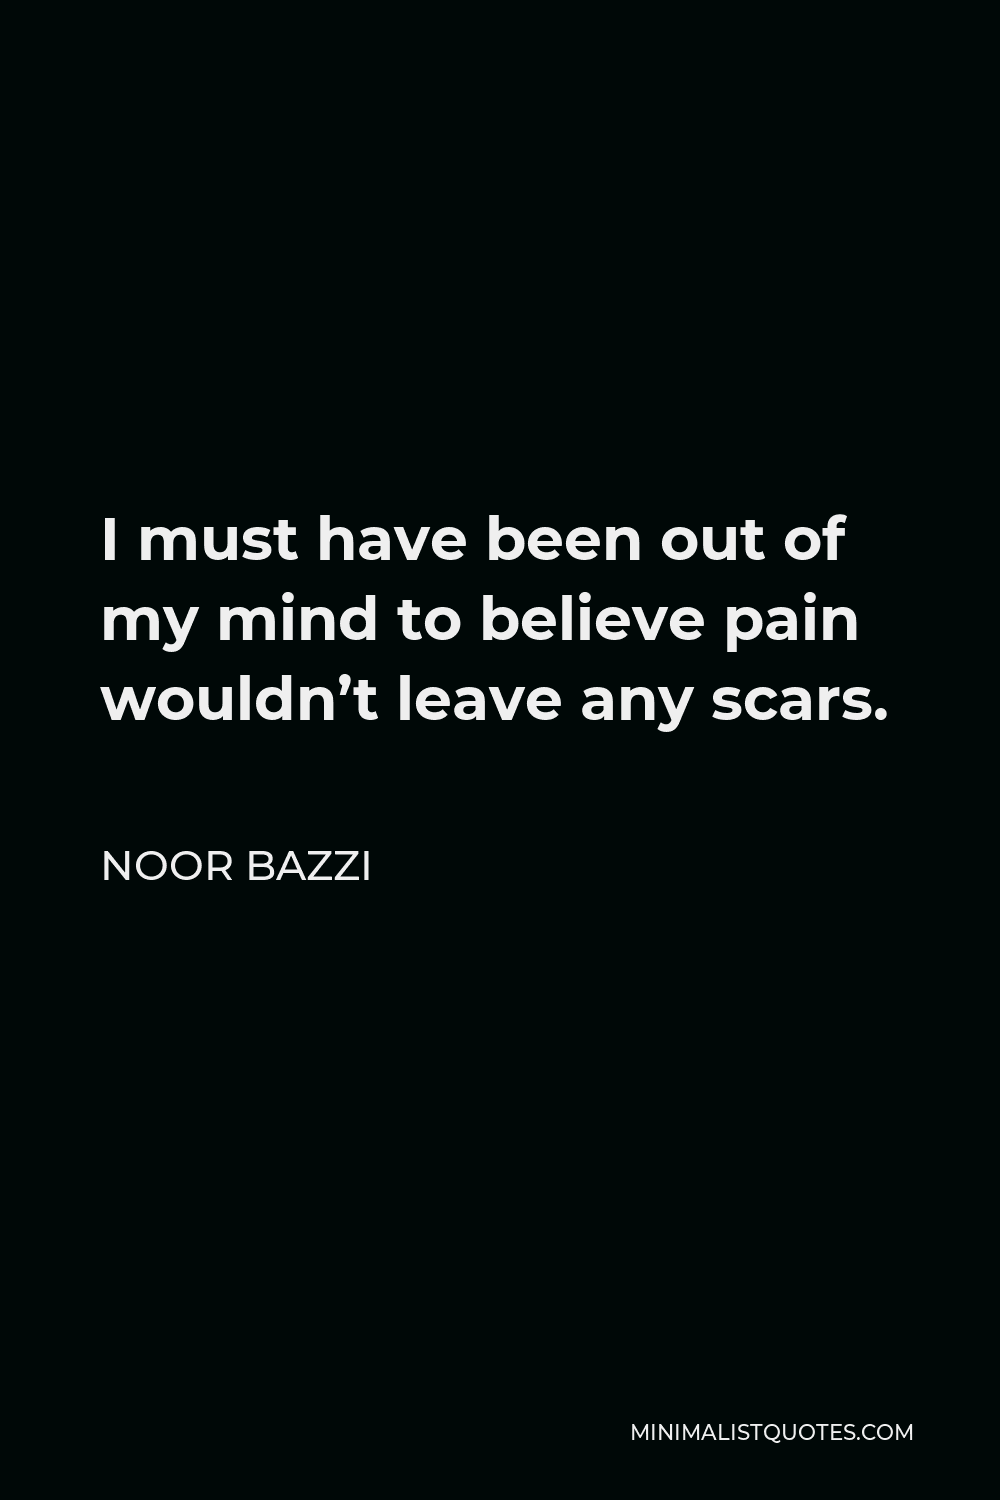 Noor Bazzi Quote - I must have been out of my mind to believe pain wouldn’t leave any scars.